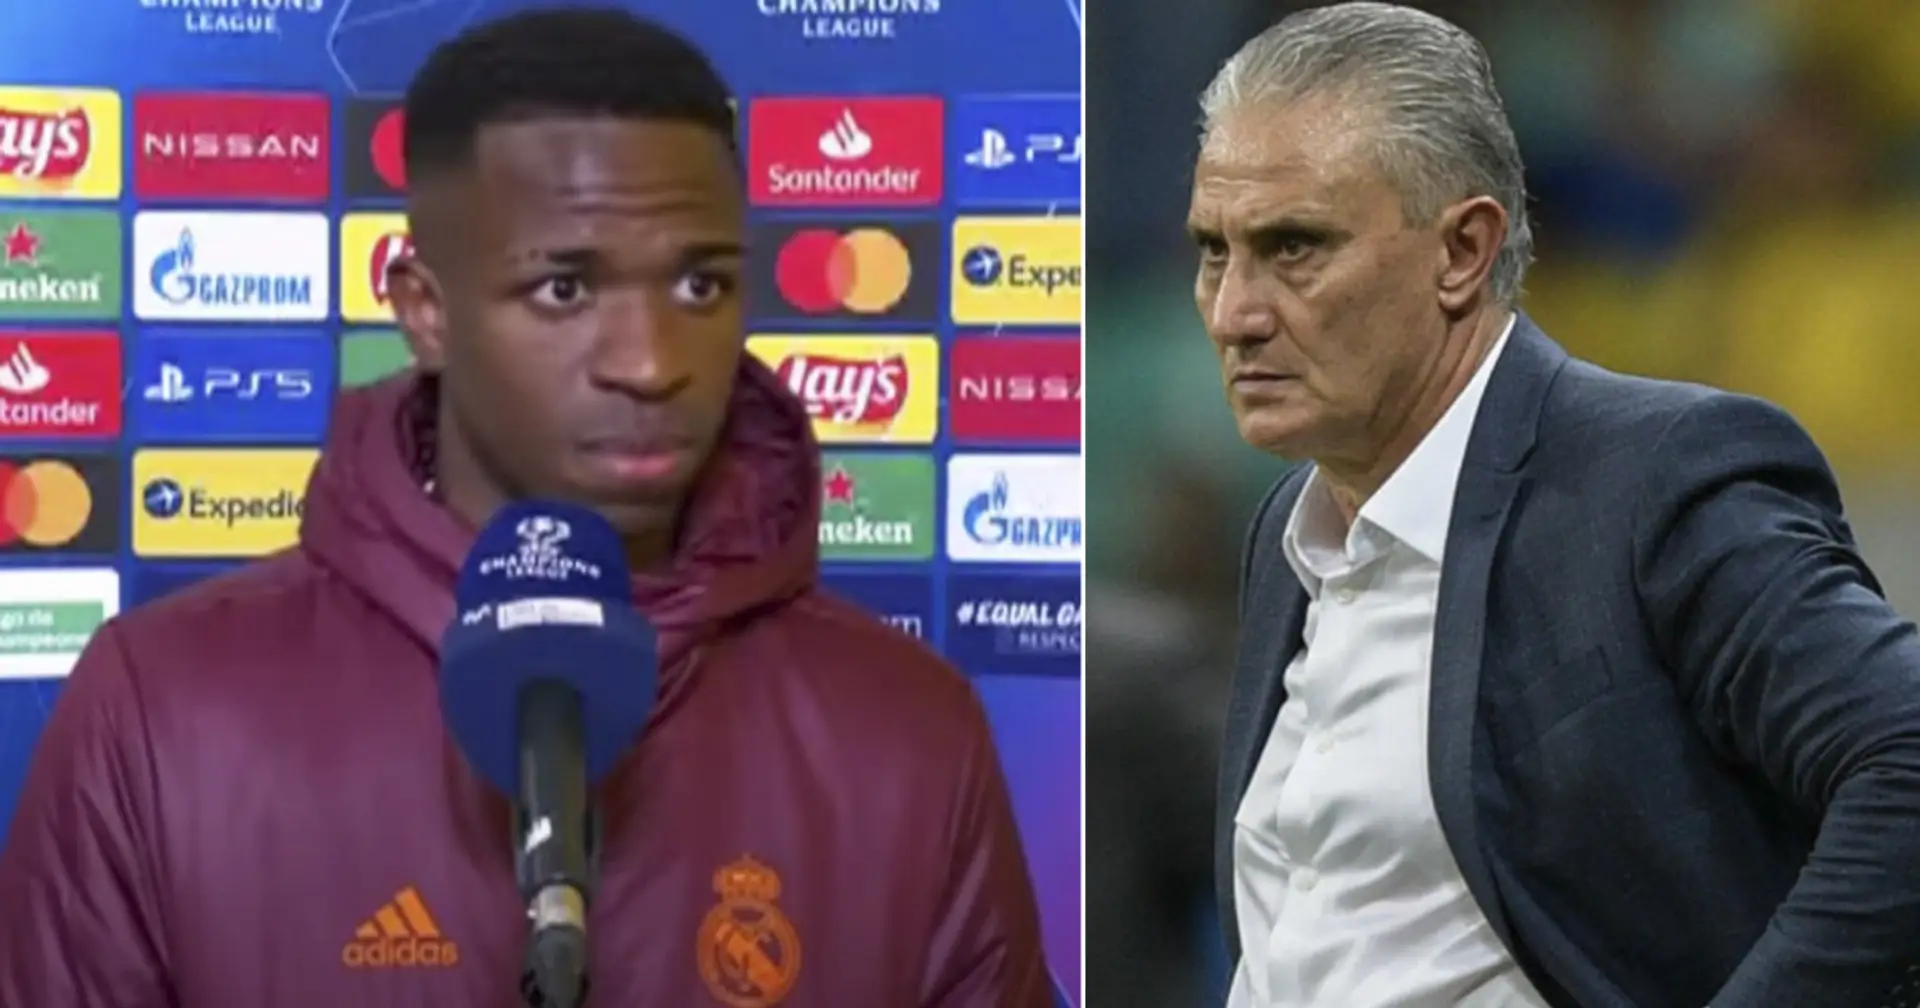 'I'm sad': Vinicius Jr reacts to missing out on Brazil squad